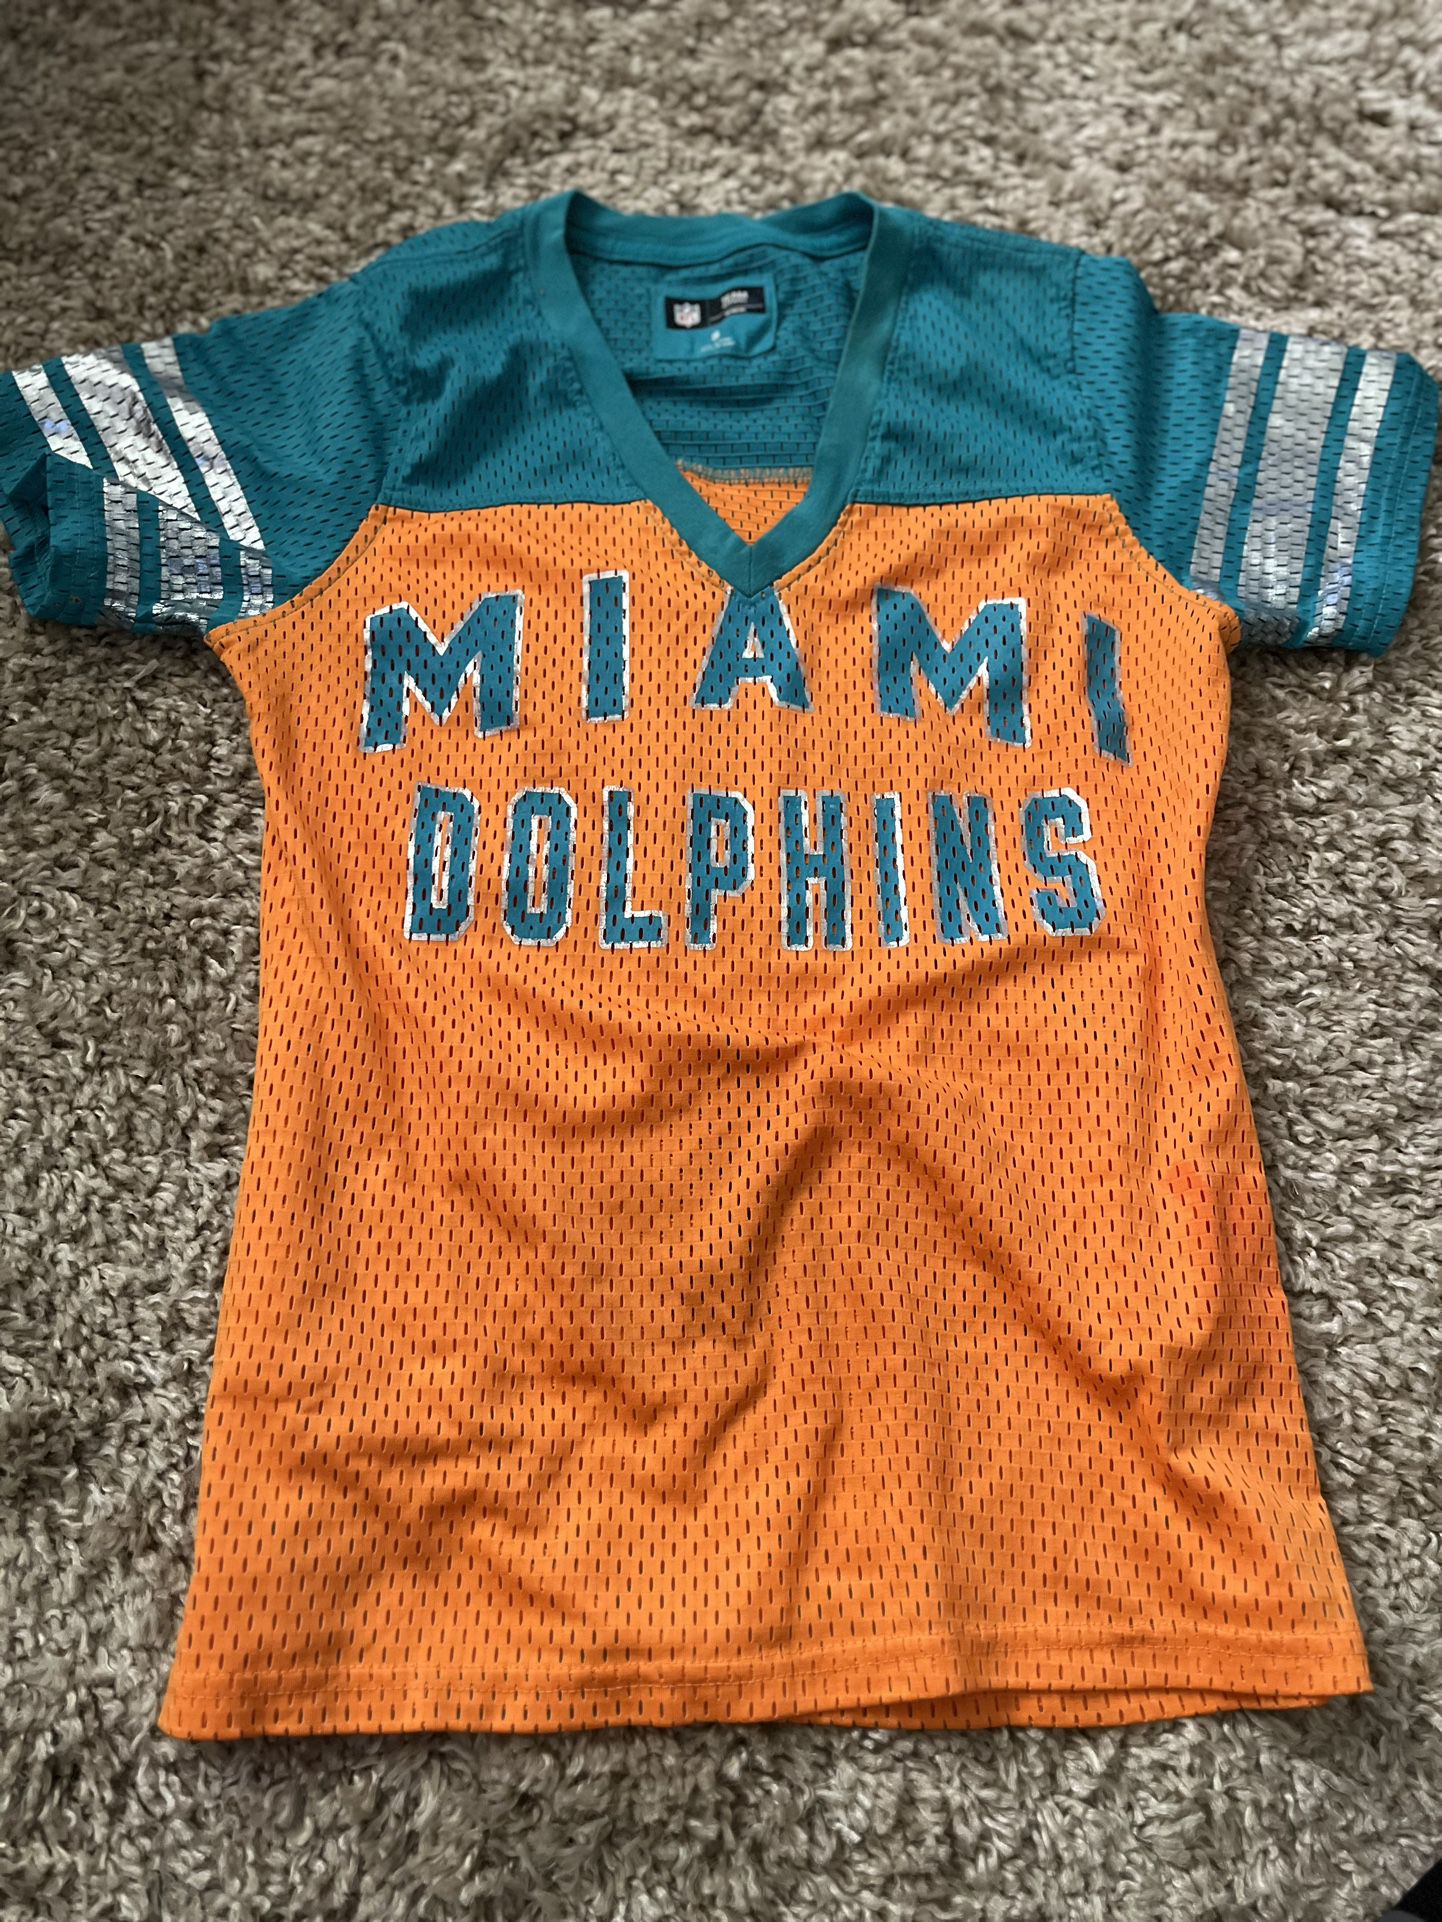 MIAMI Dolphins Jersey 